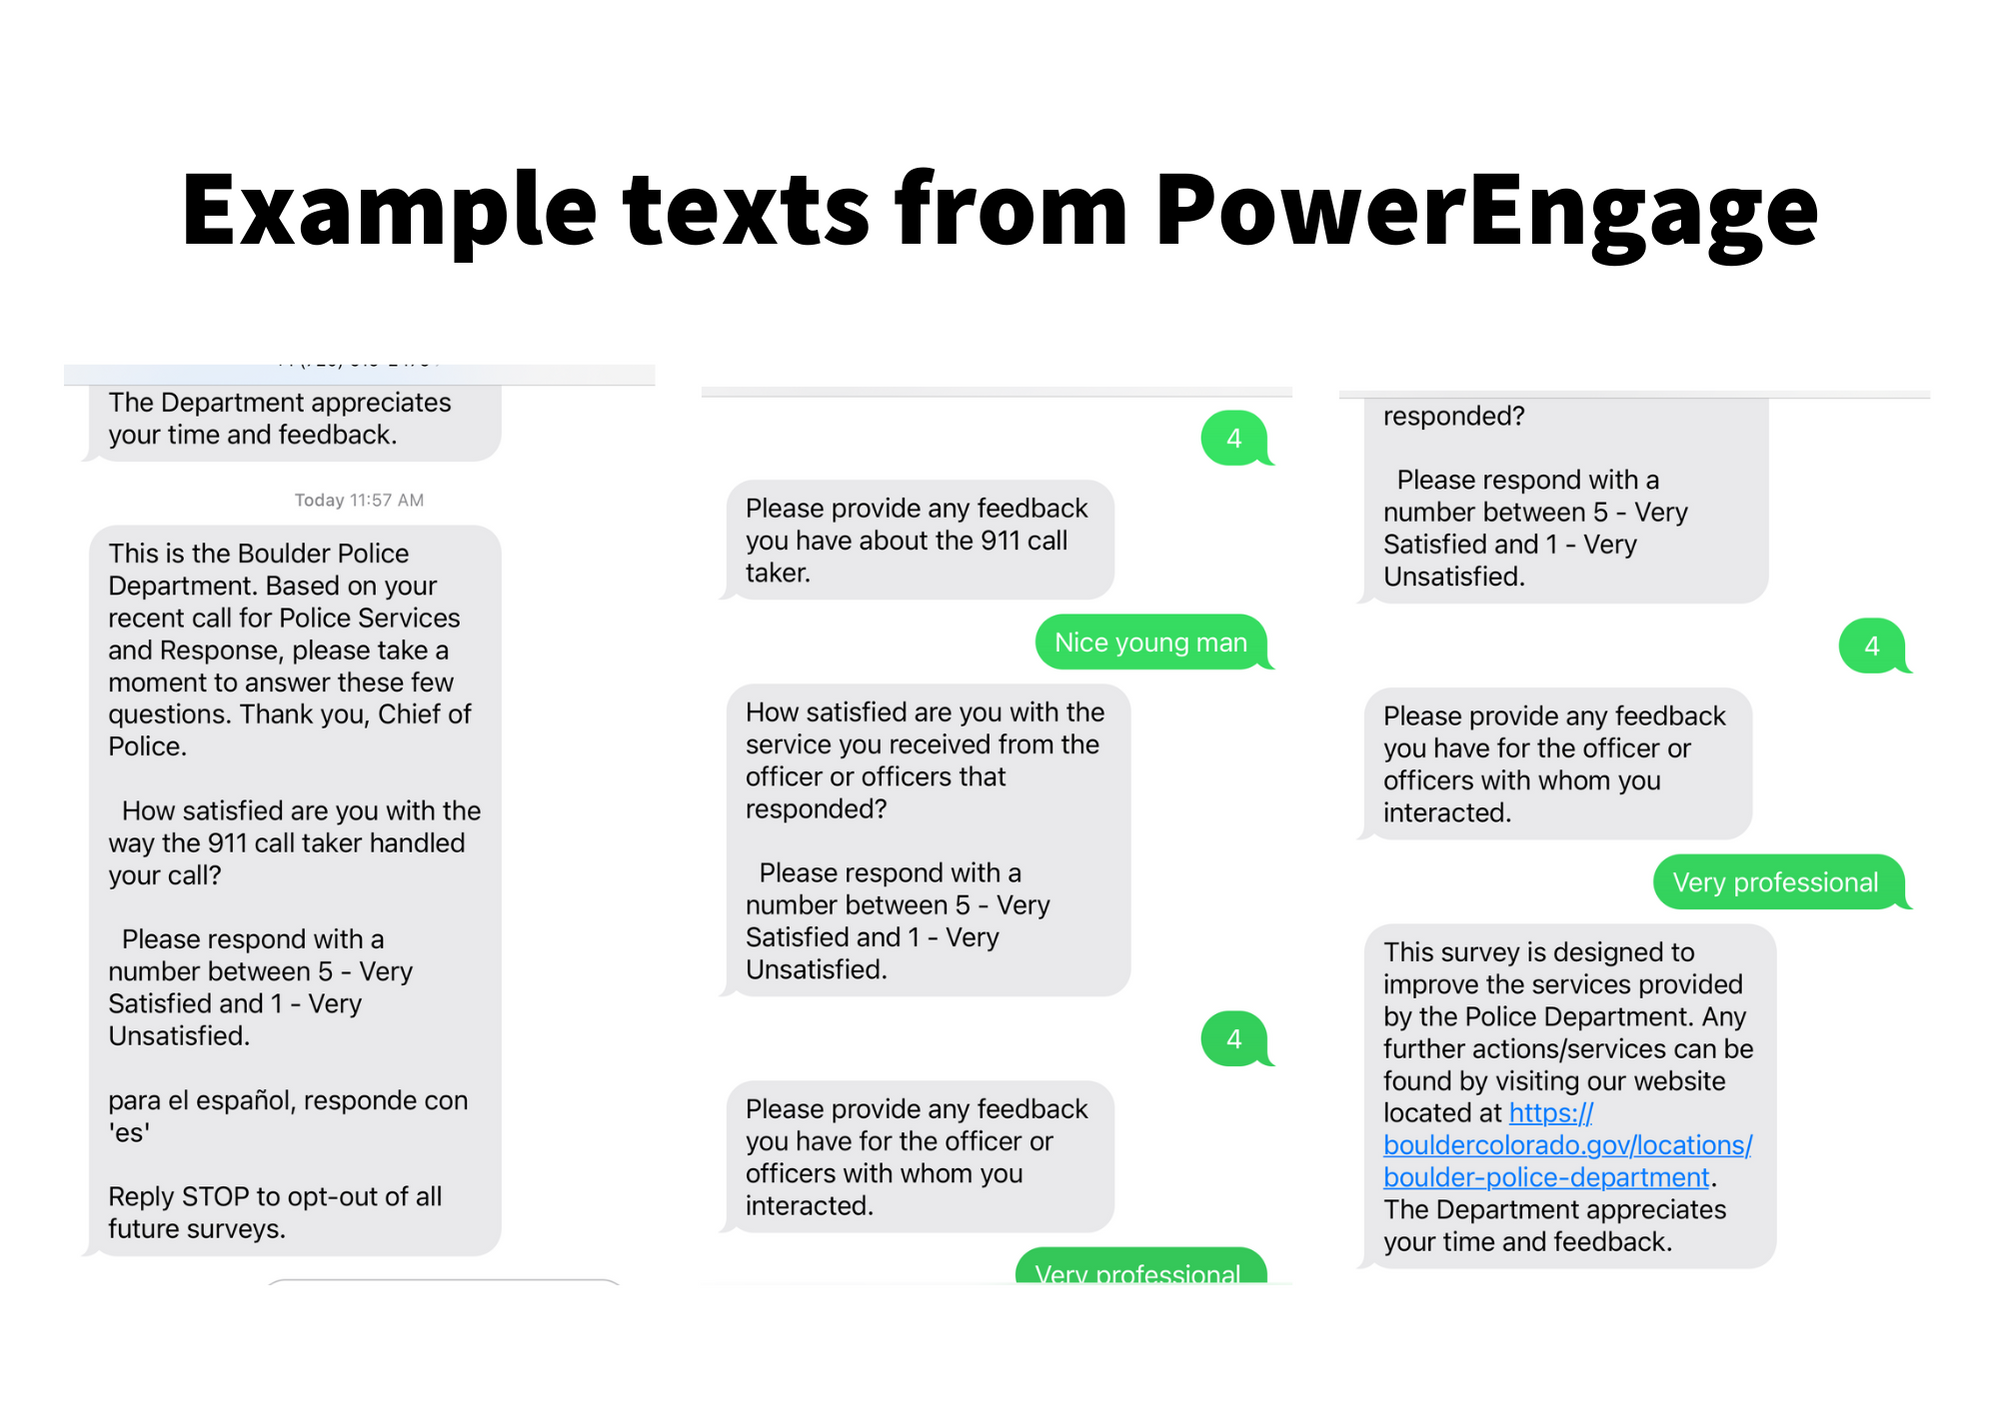 Example Texts from PowerEngage